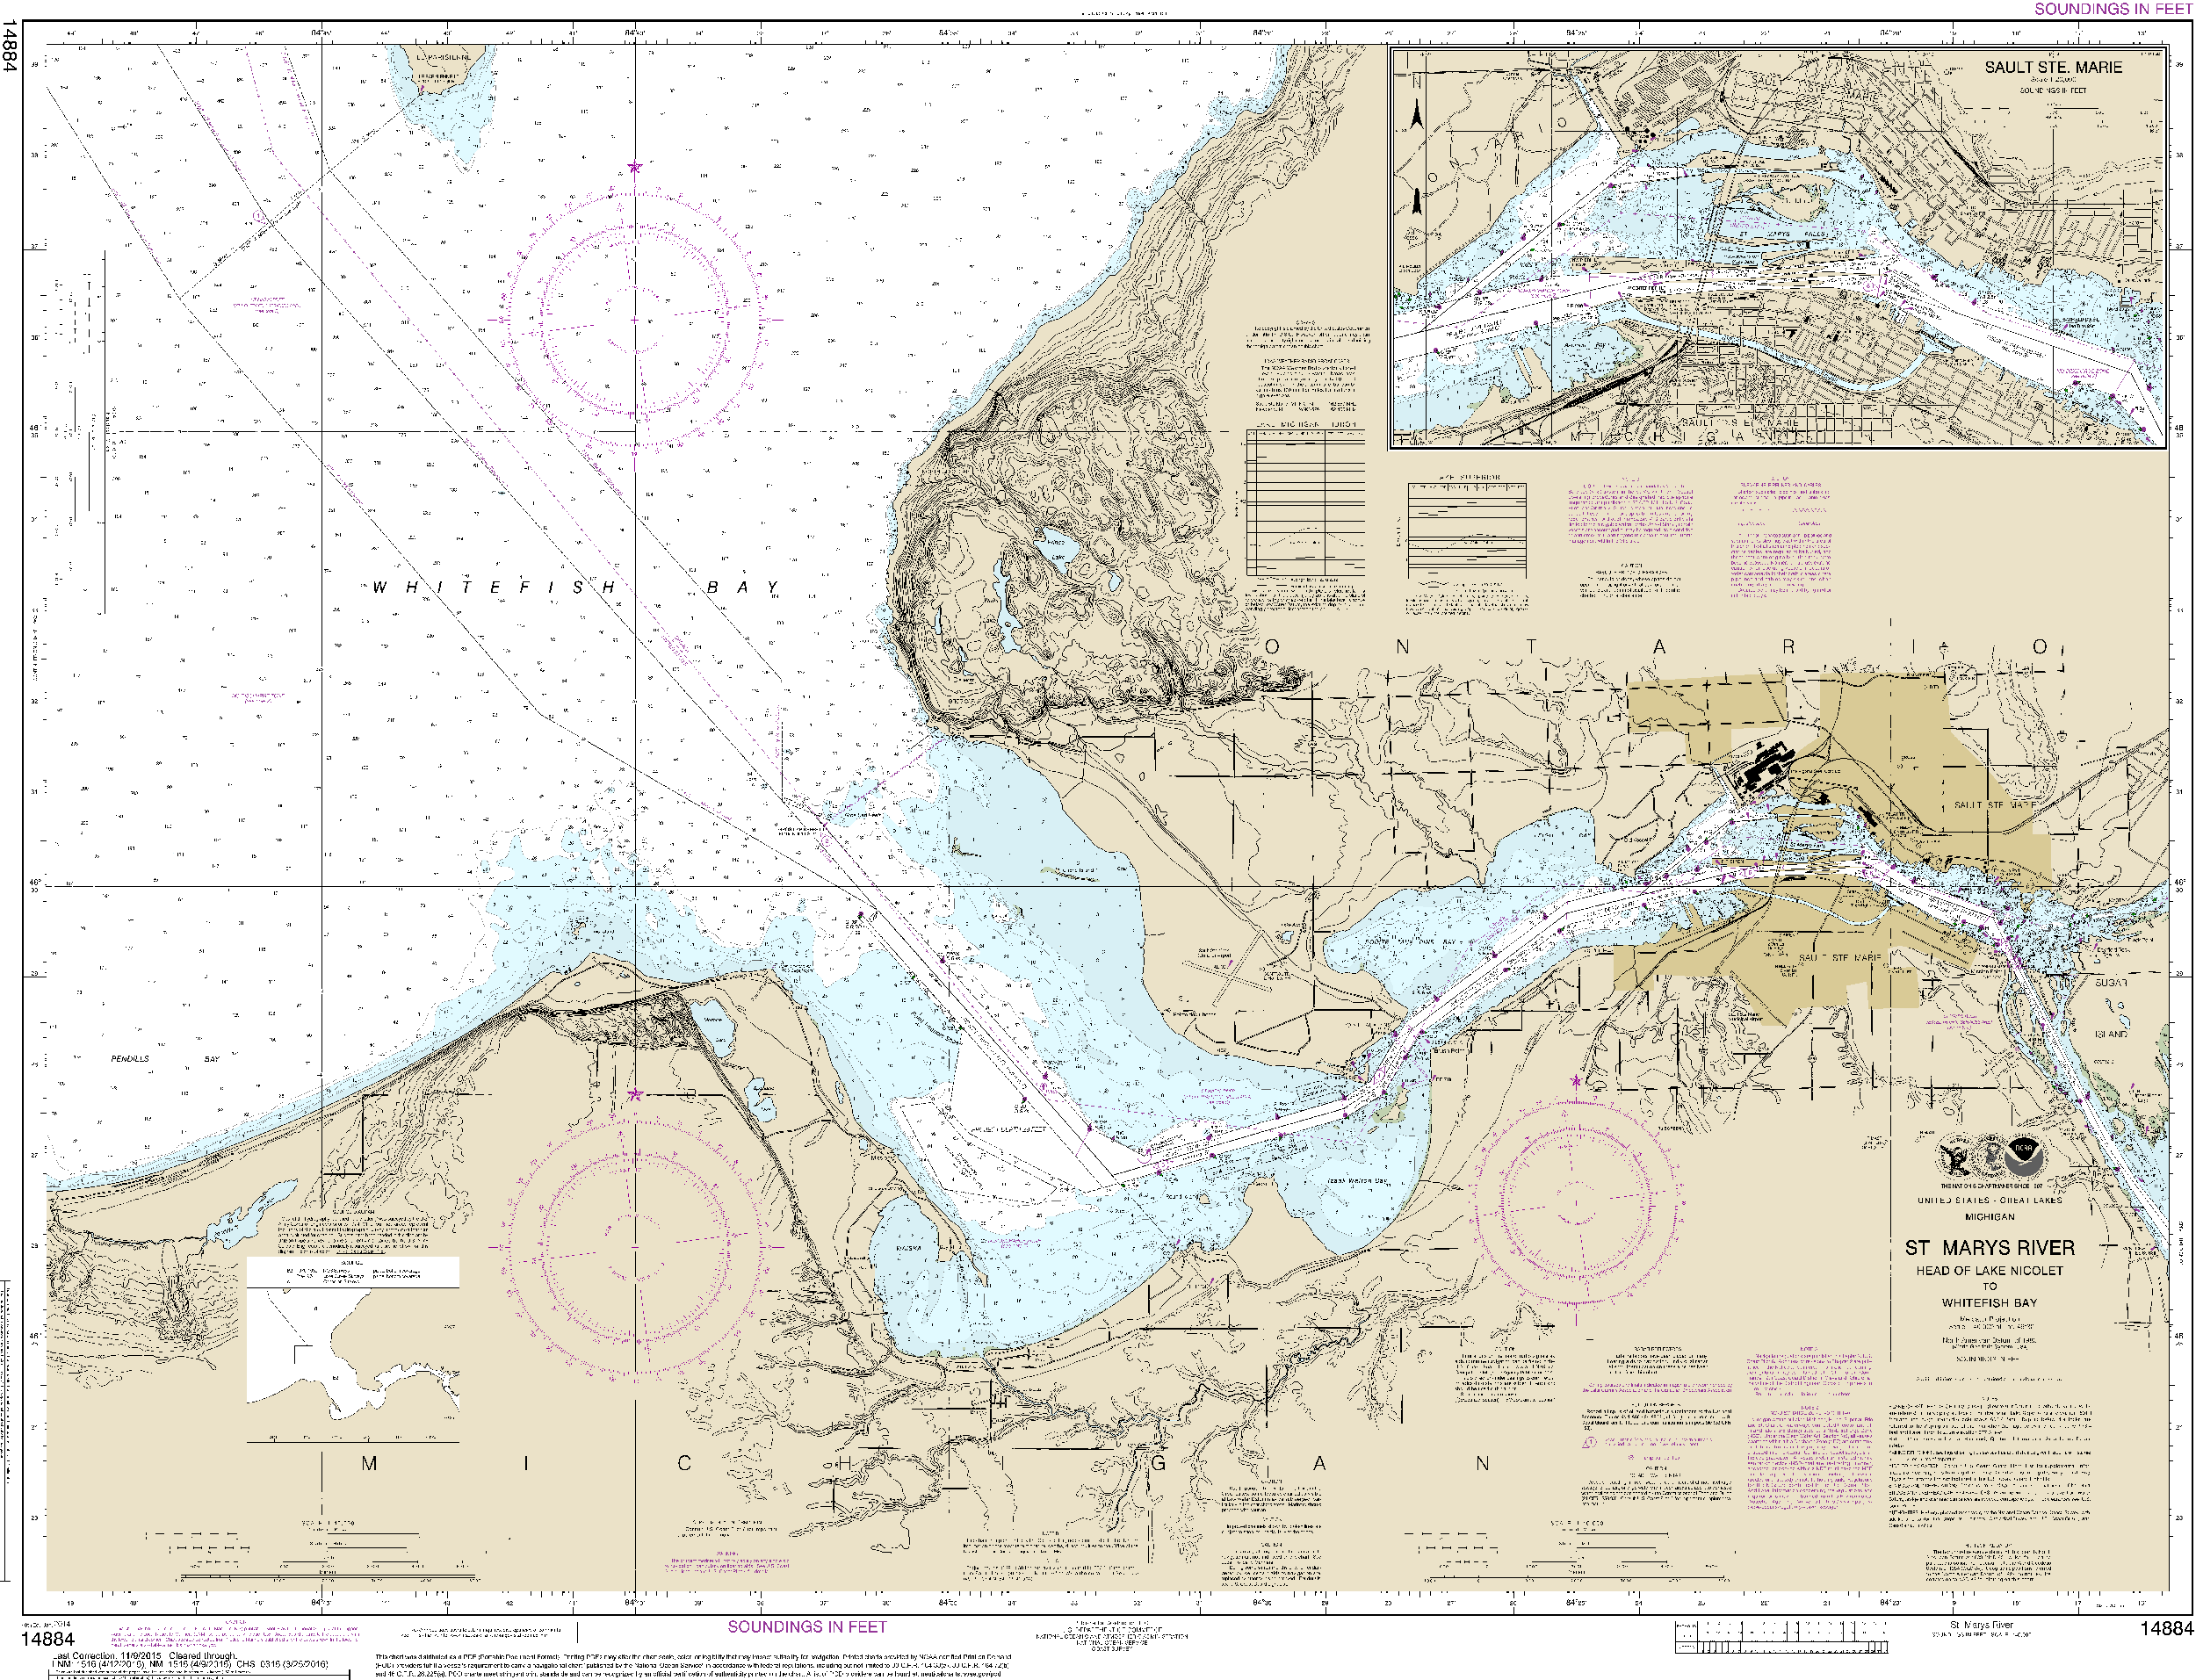 NOAA Nautical Chart 14884: St. Marys River - Head of Lake Nicolet to Whitefish Bay;Sault Ste. Marie